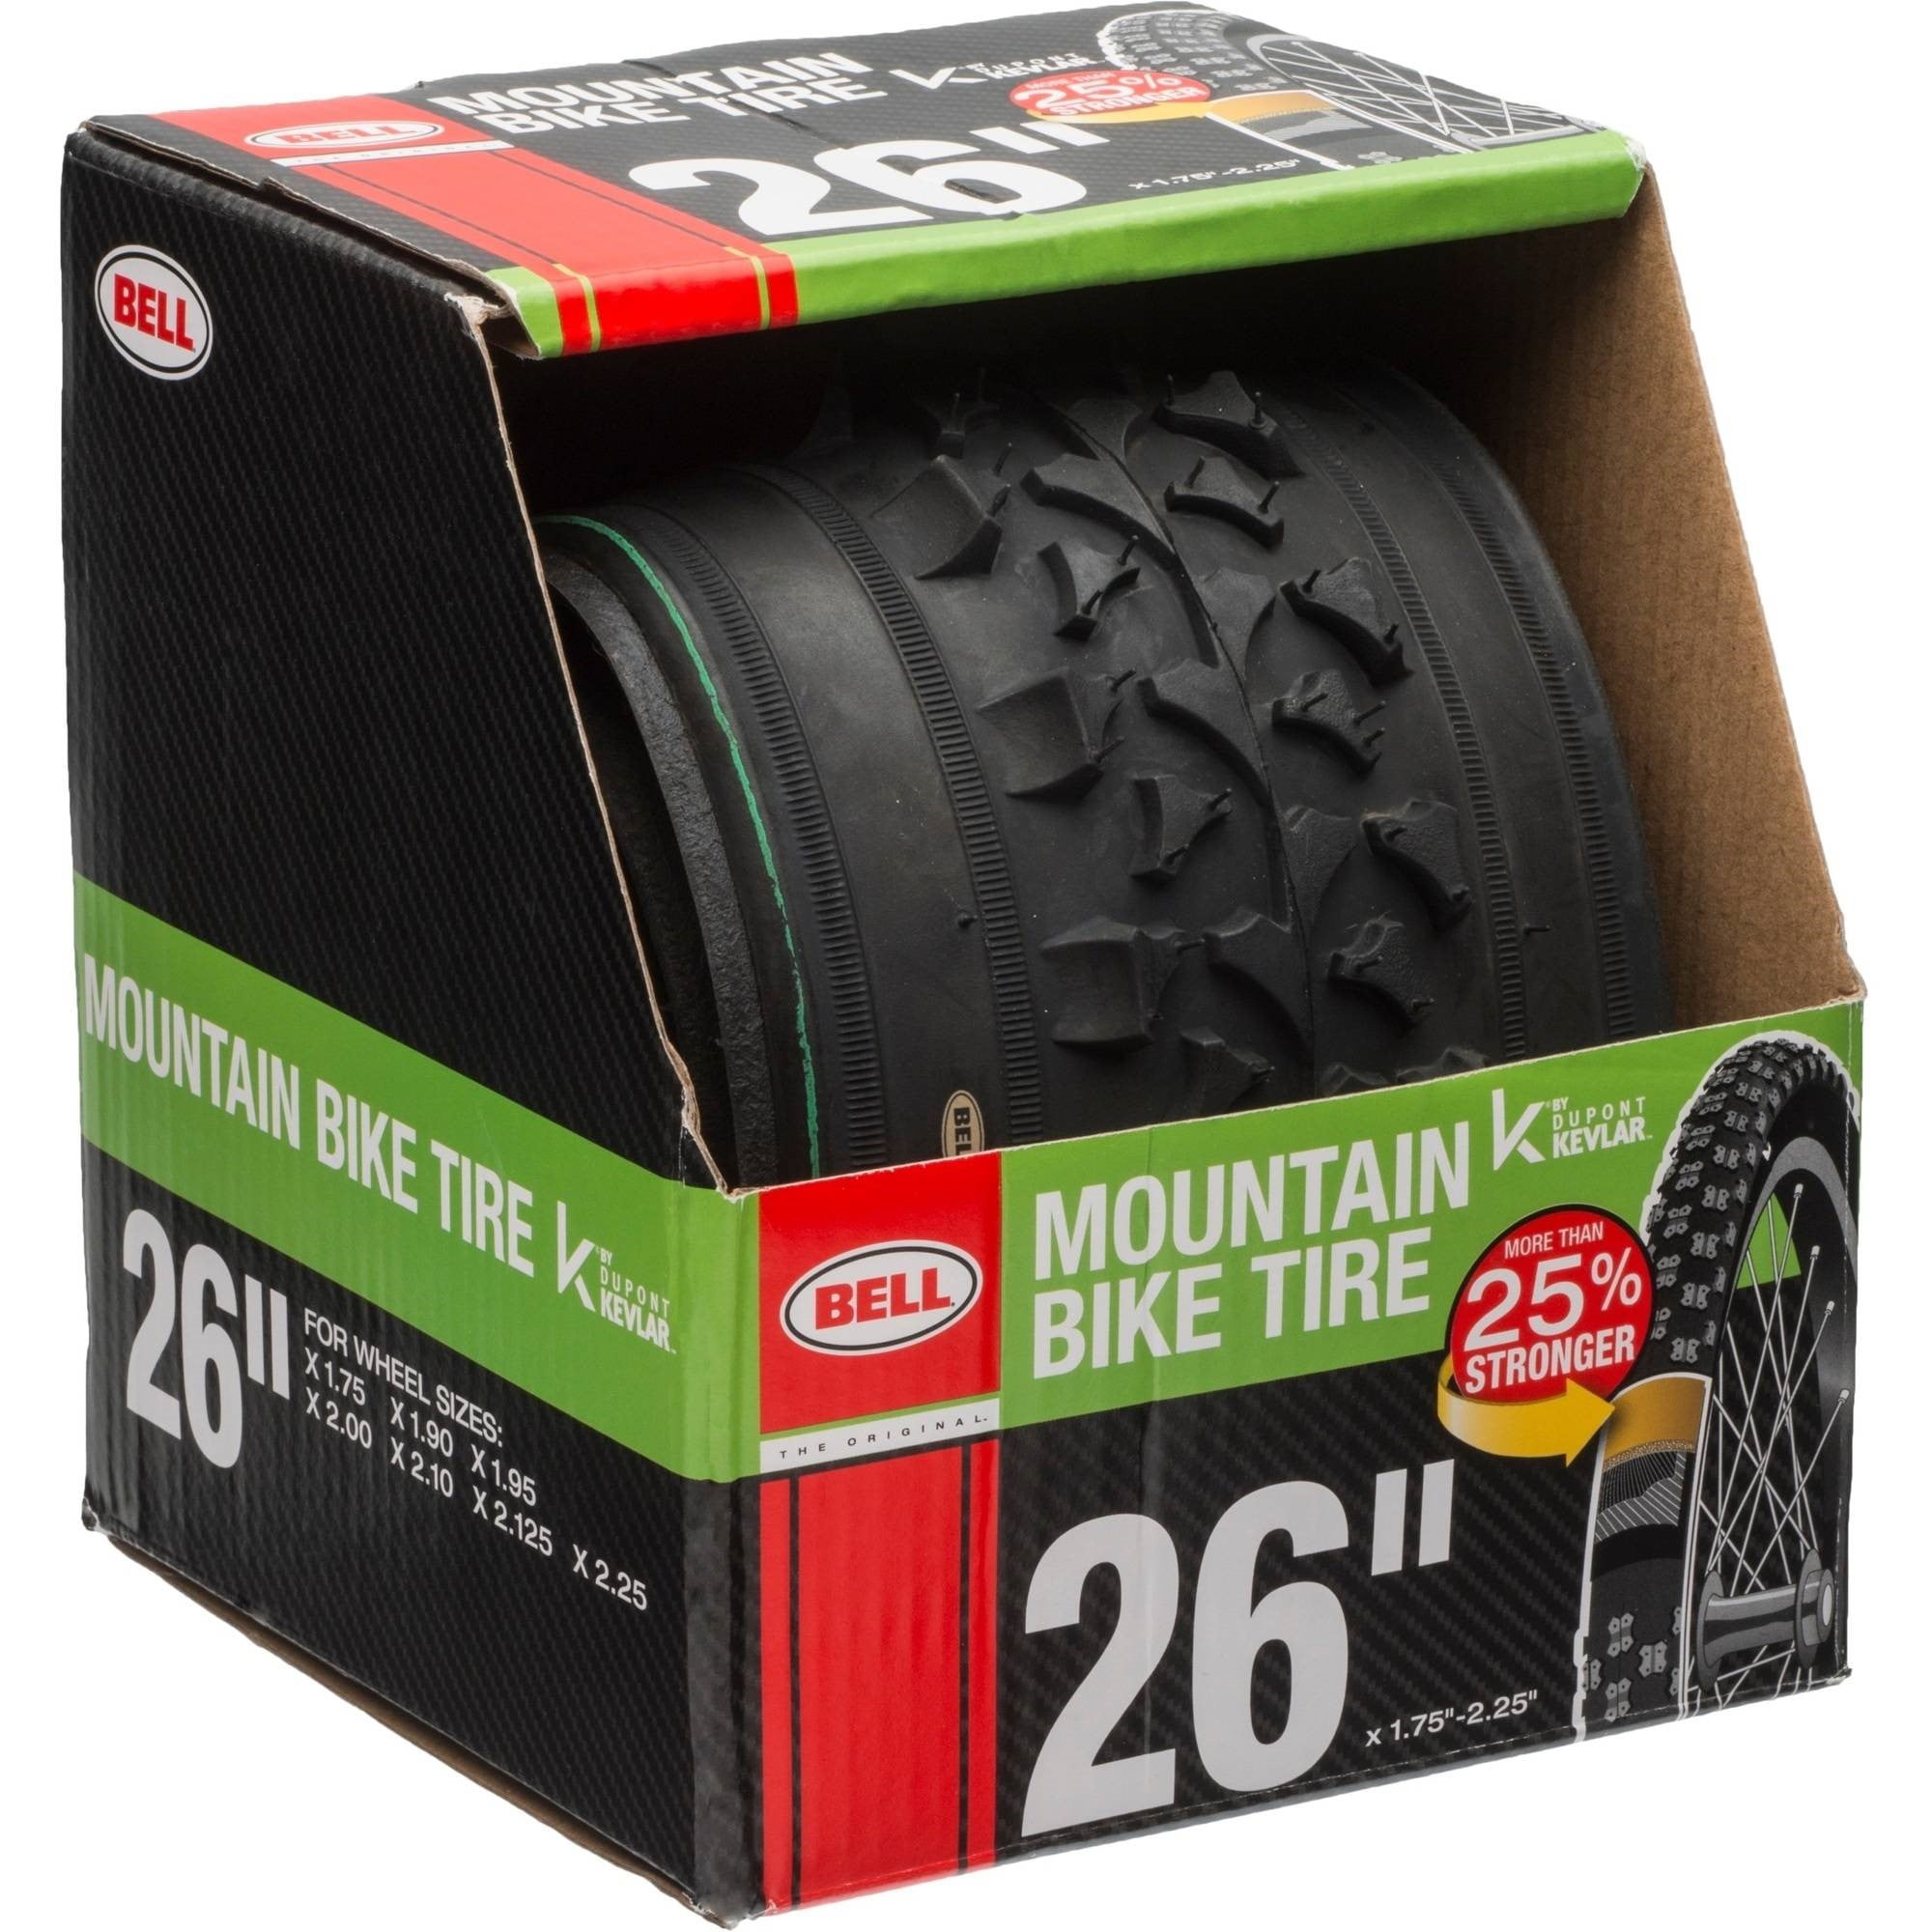 30% Strong Details about   Bell Mountain Bike Tire 20”x2.10 air Guard Anti-apuncture protection 